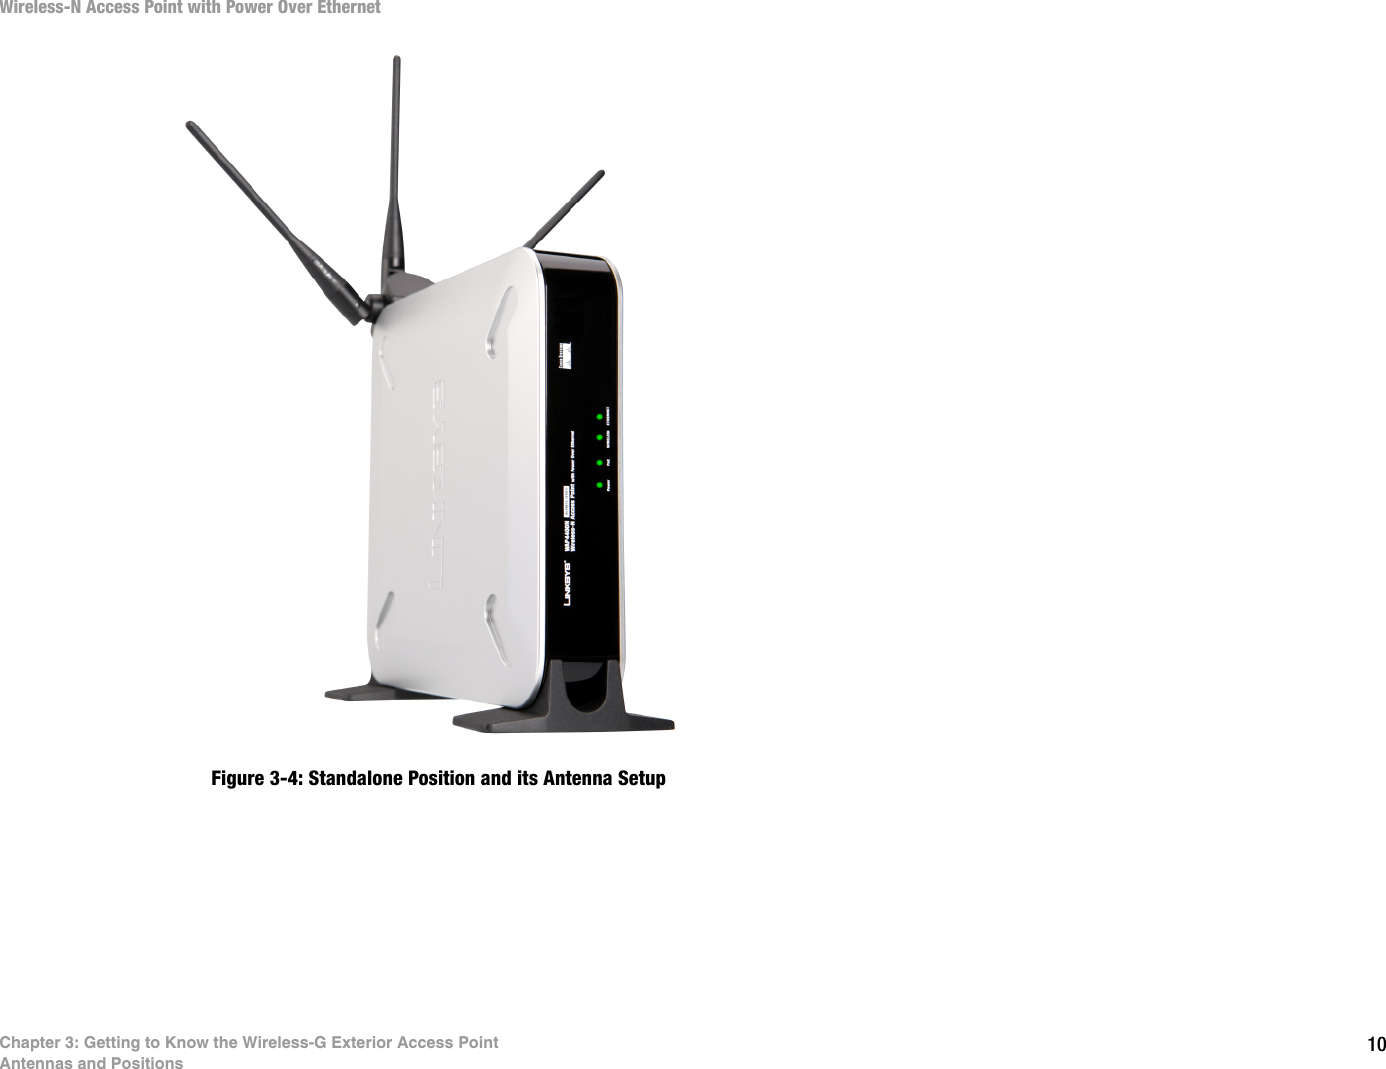 10Chapter 3: Getting to Know the Wireless-G Exterior Access PointAntennas and PositionsWireless-N Access Point with Power Over EthernetFigure 3-4: Standalone Position and its Antenna Setup